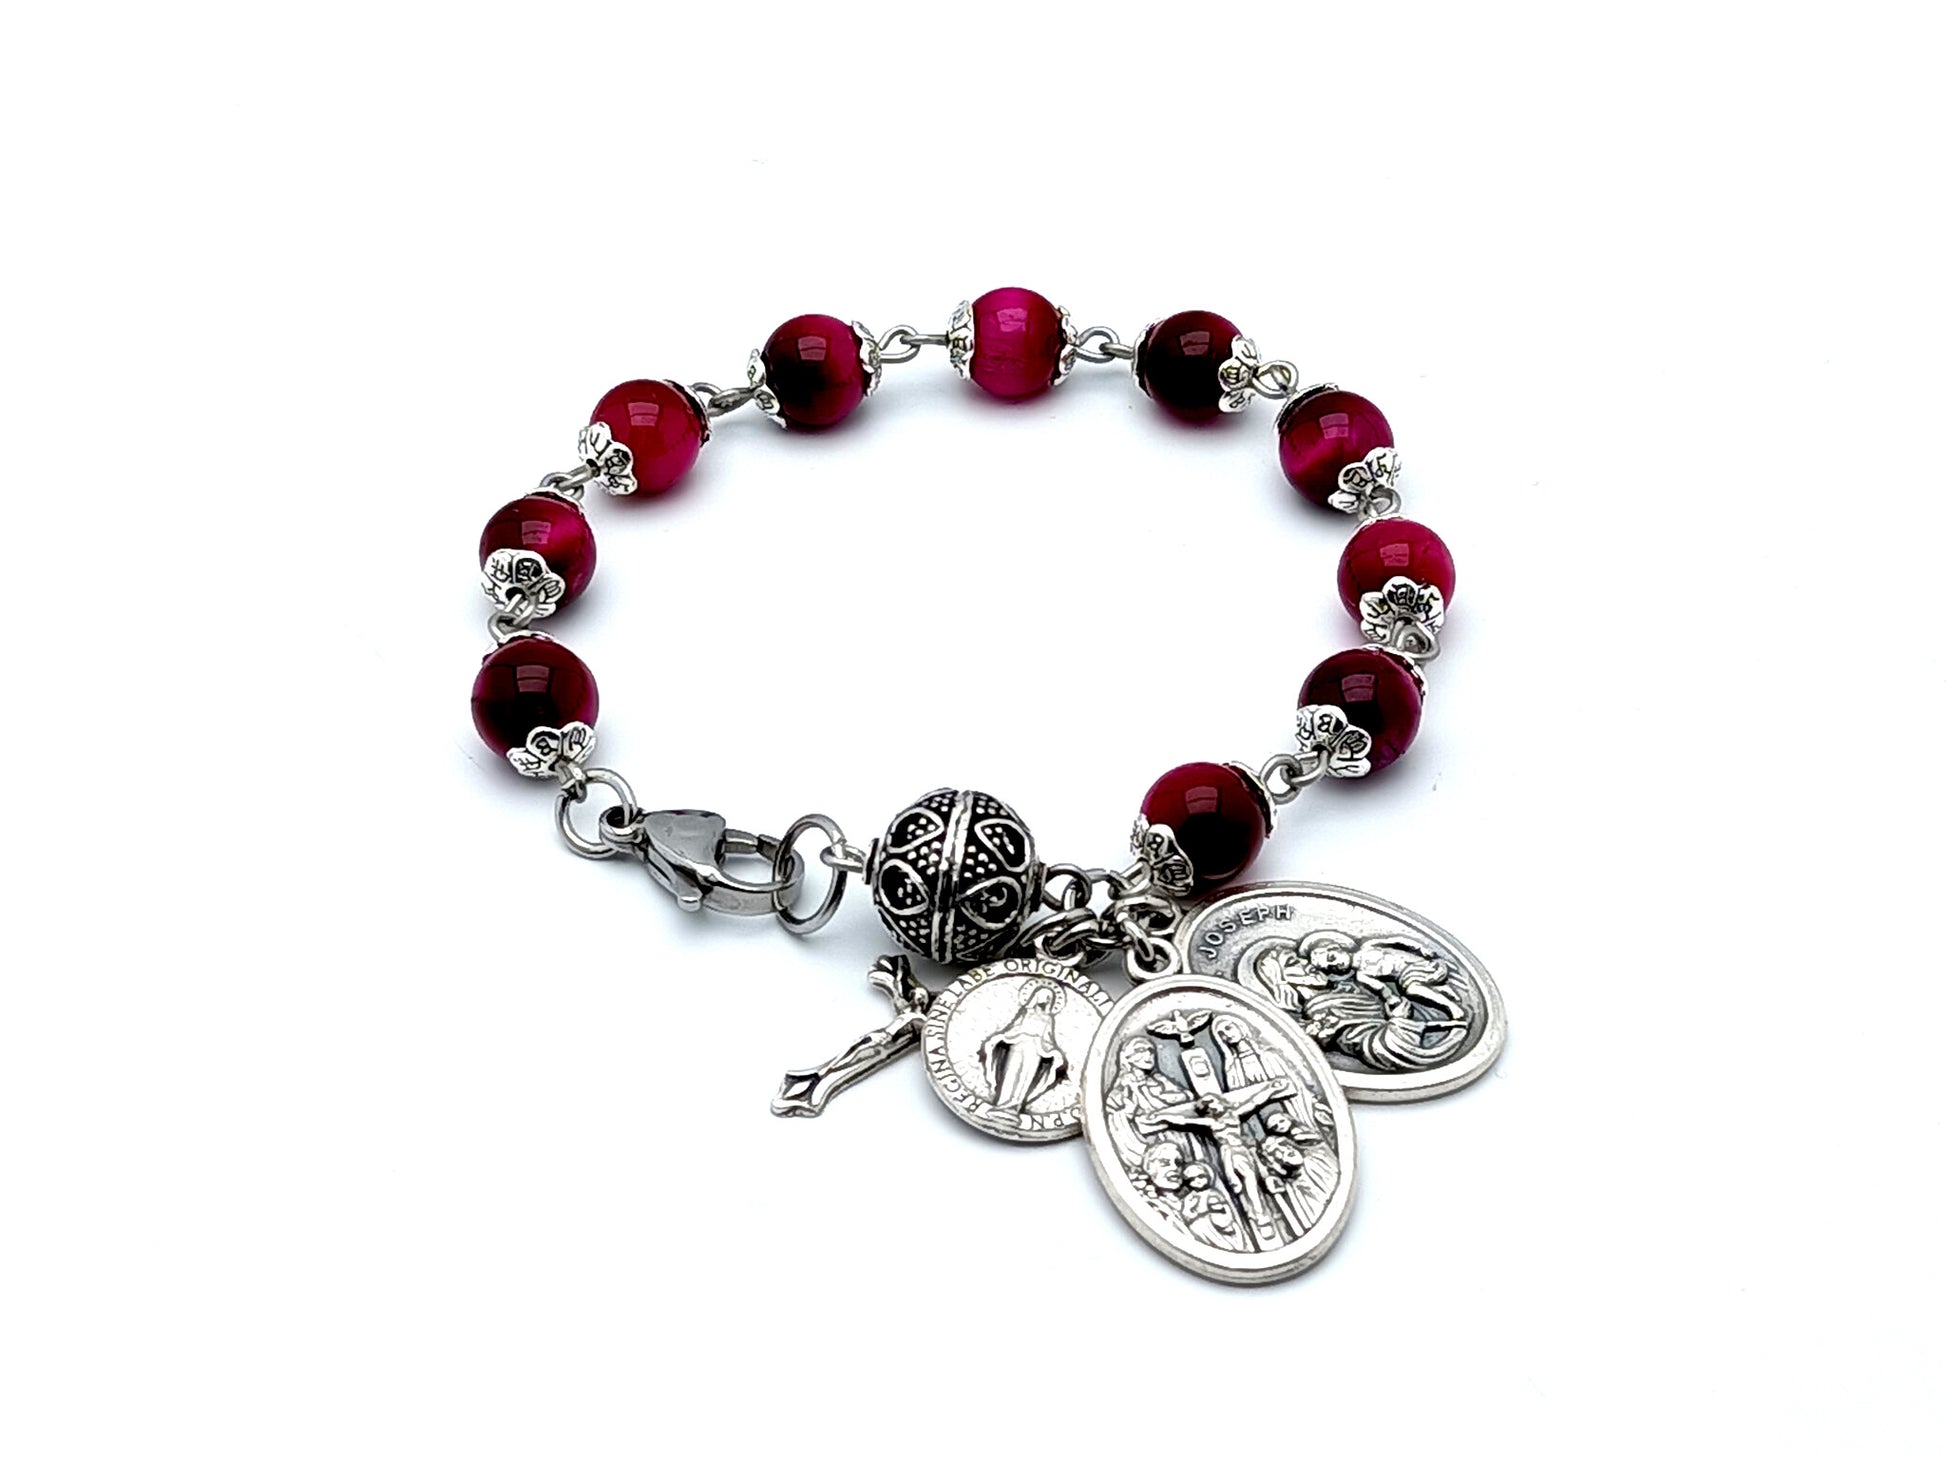 Pink tigers eye gemstone unique rosary beads single decade rosary bracelet with I am a Catholic medal.